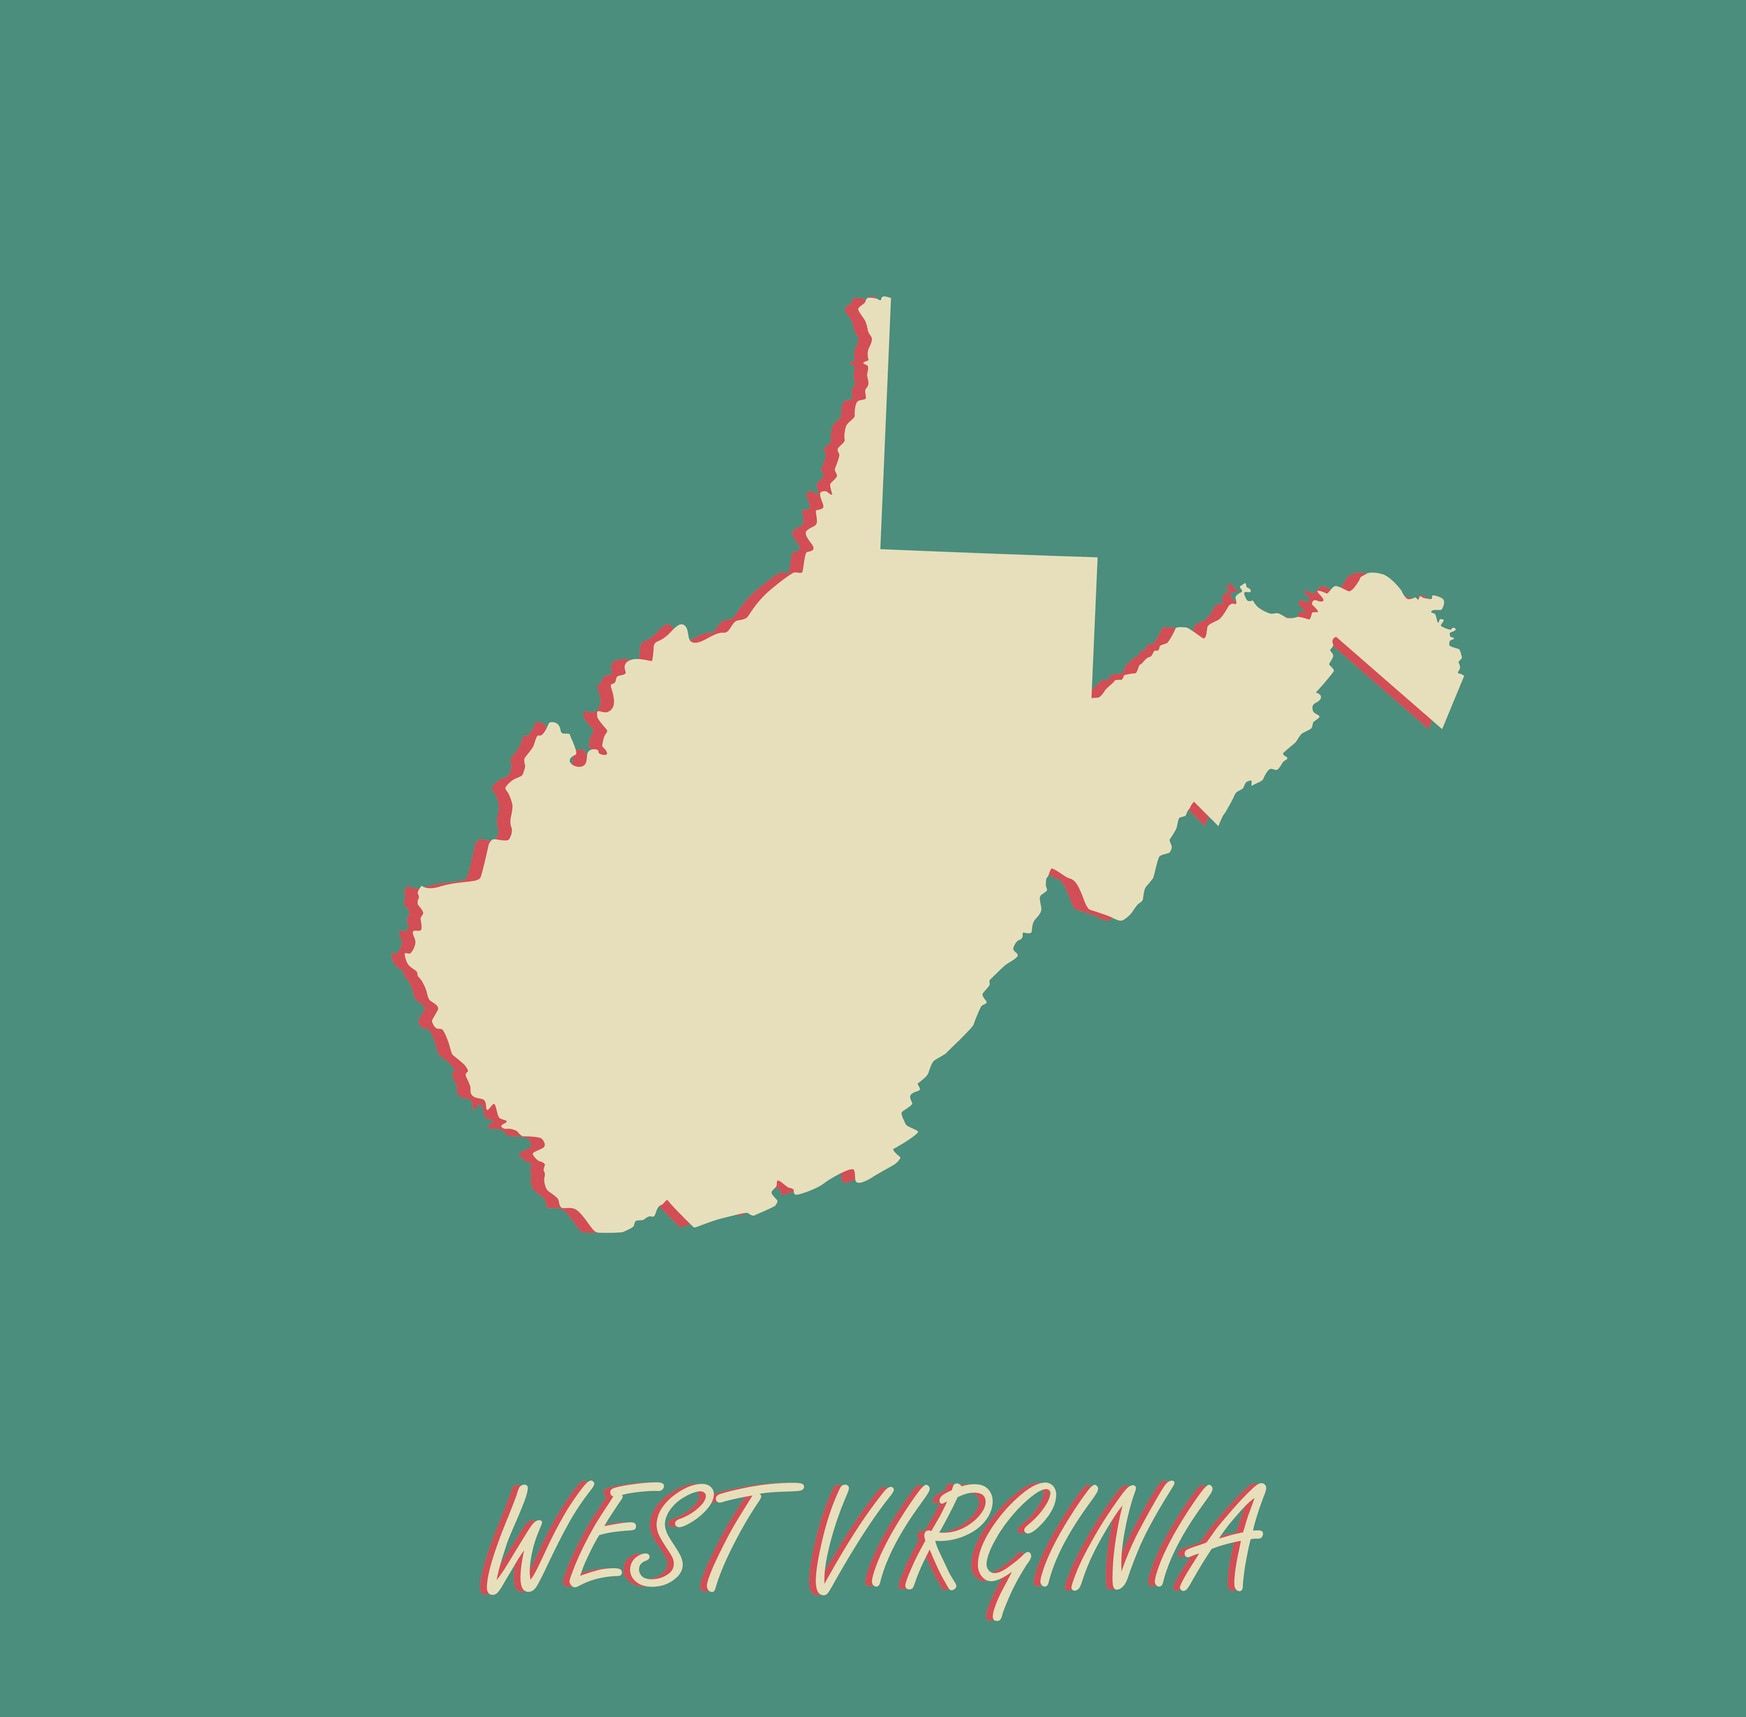 West Virginia household employment tax and labor law guide